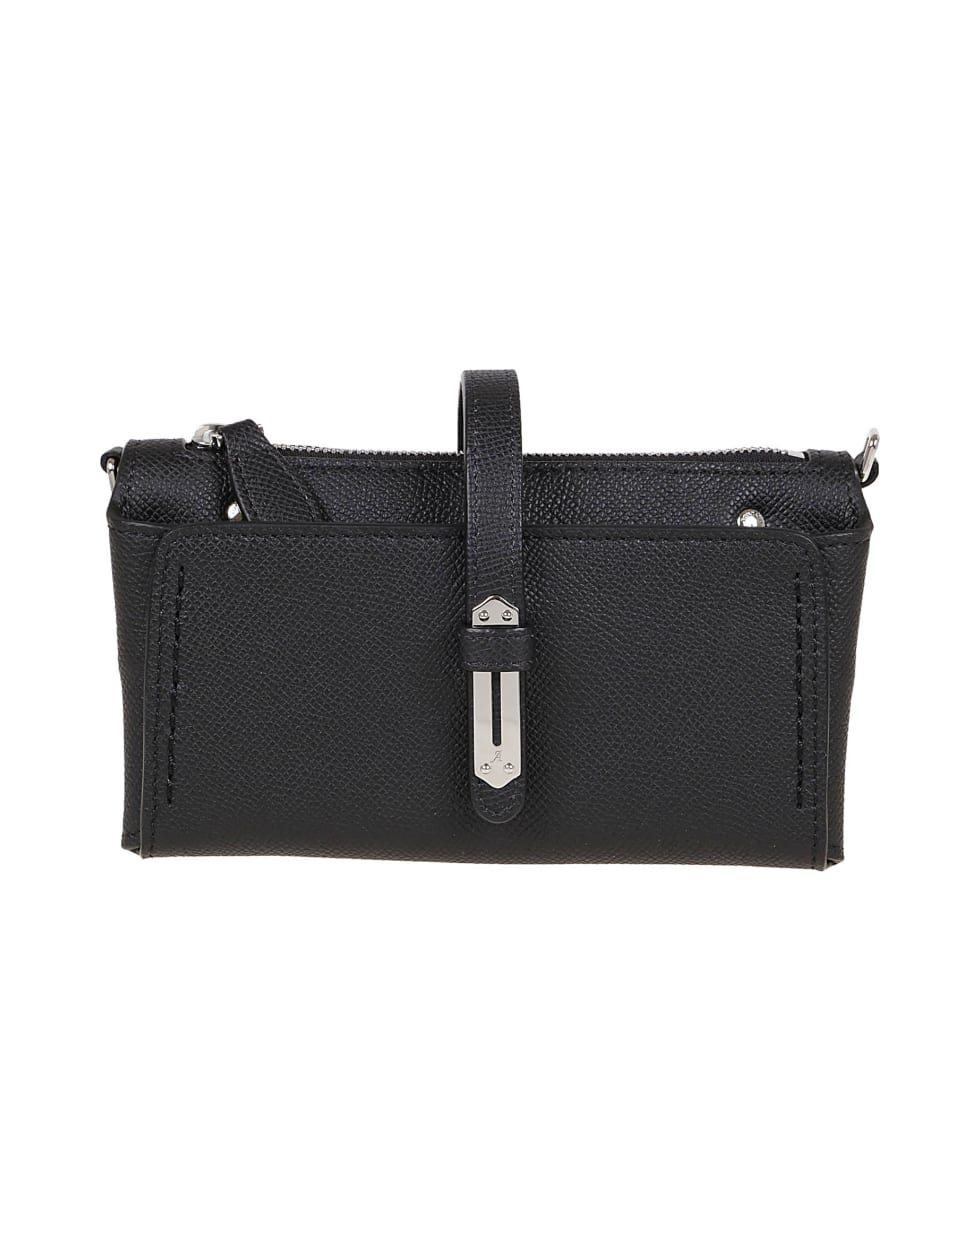 Fontana Couture Leather Bag - Carbon